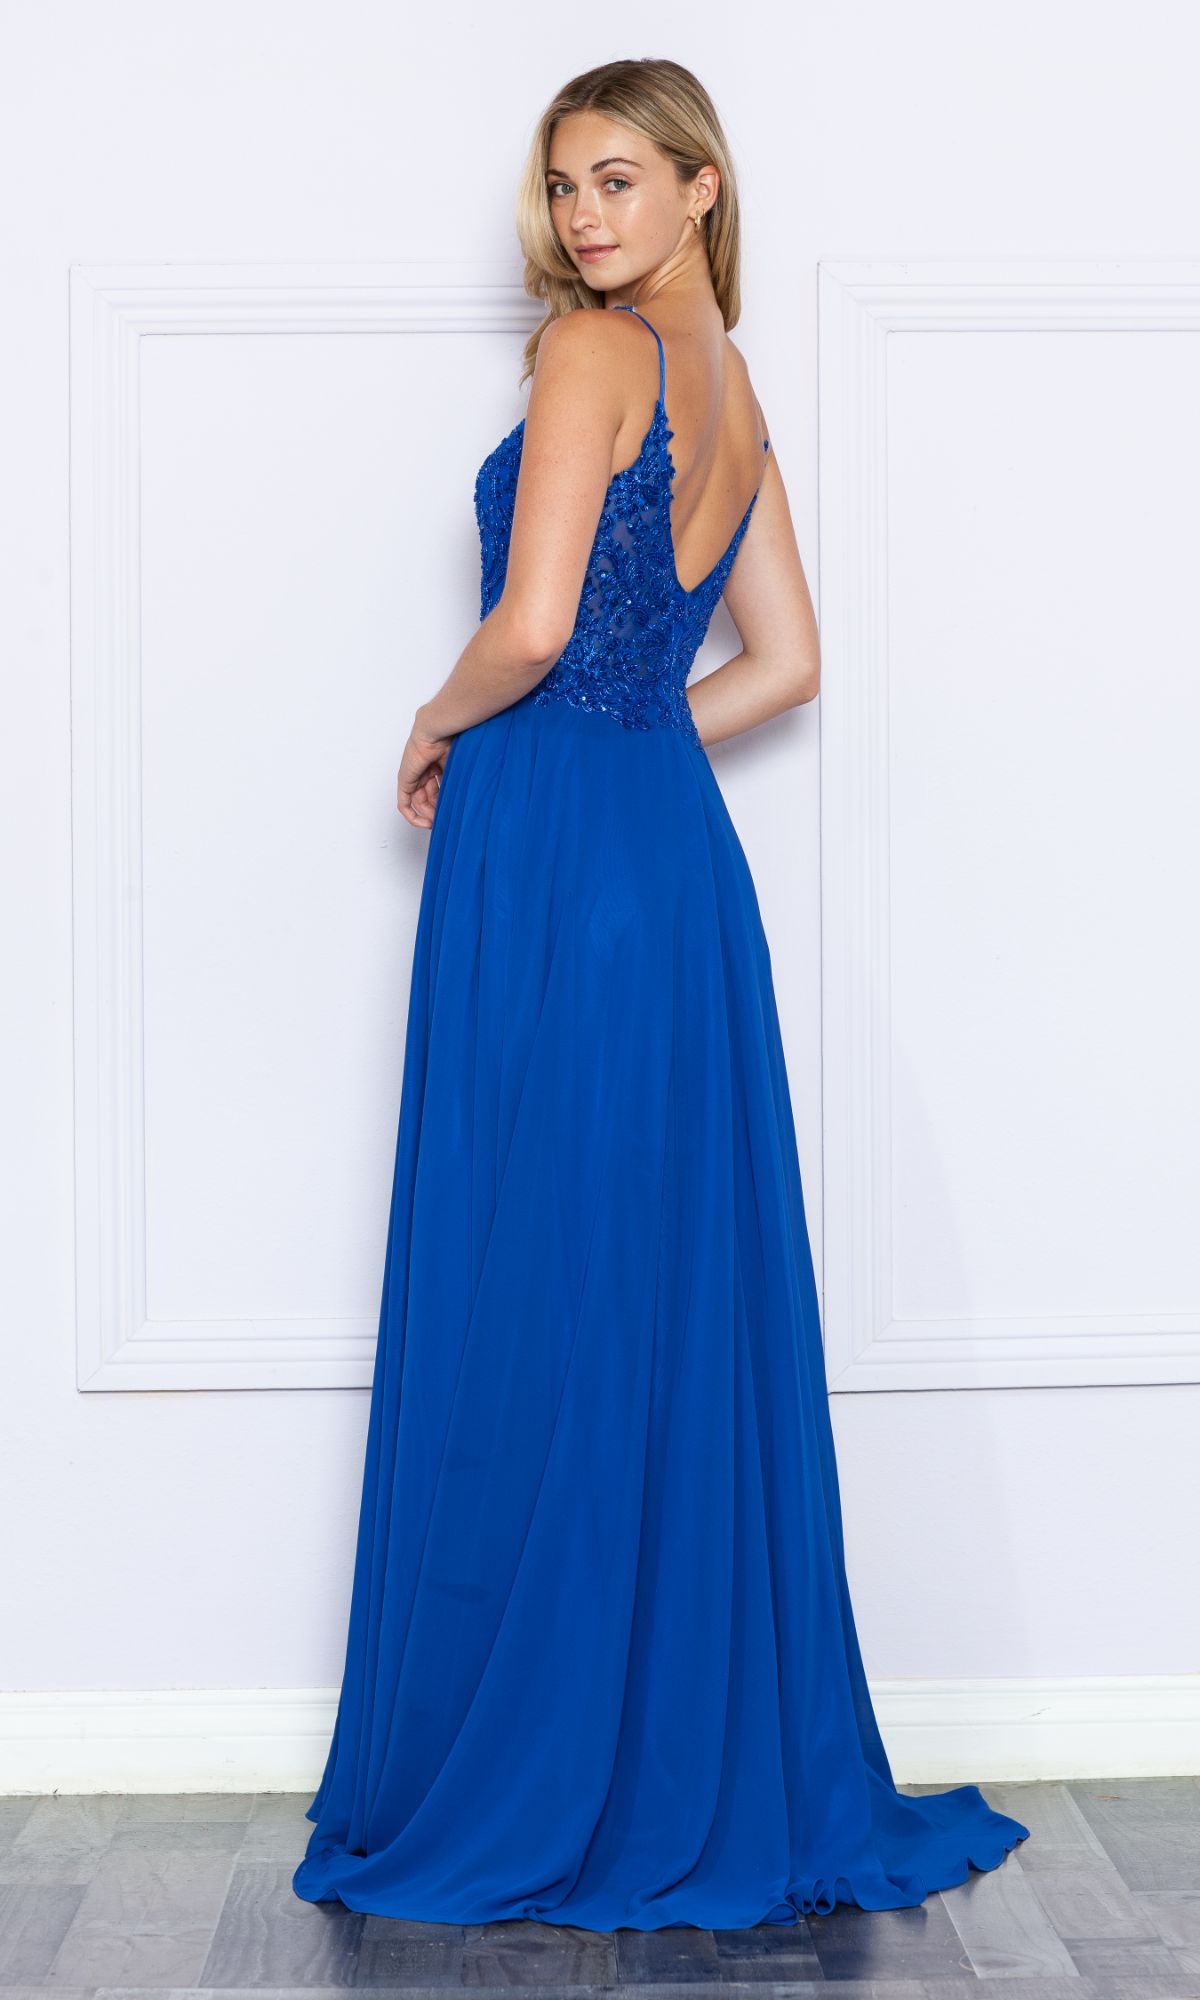 Long A-Line Prom Dress with Beaded Bodice - PromGirl